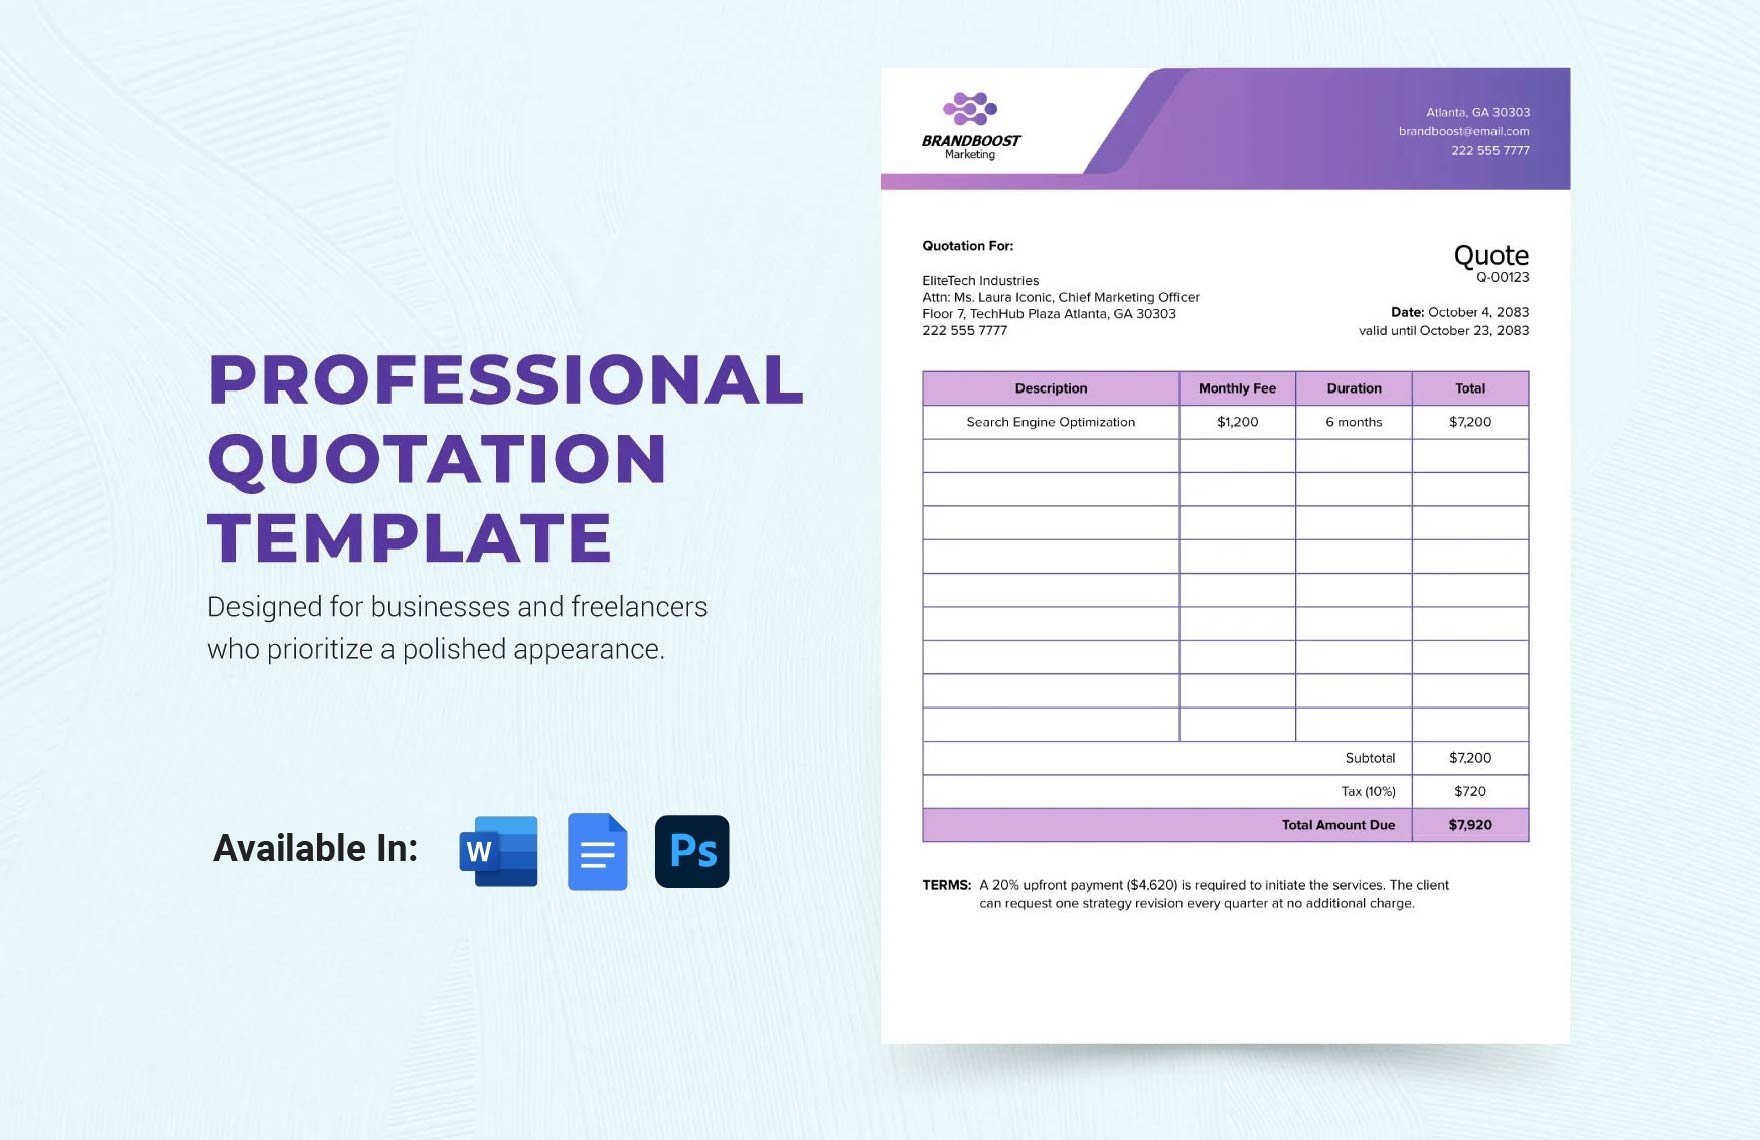 Professional Quotation Template